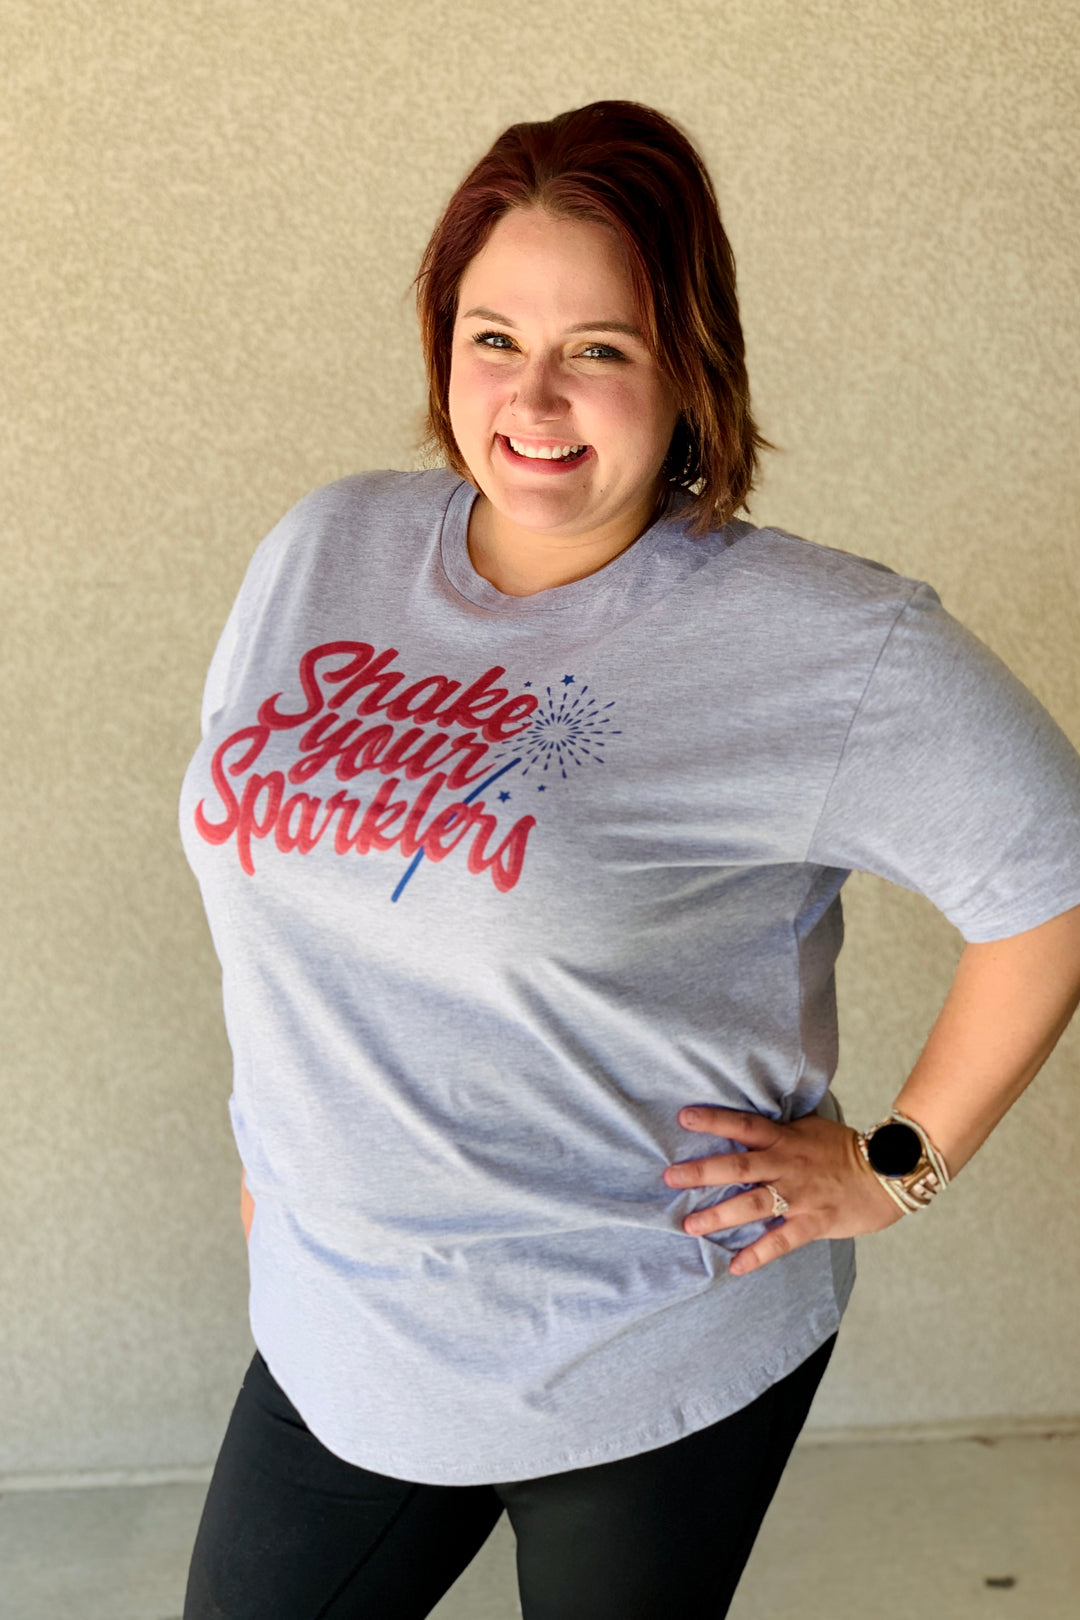 Shake Your Sparklers Graphic Tee